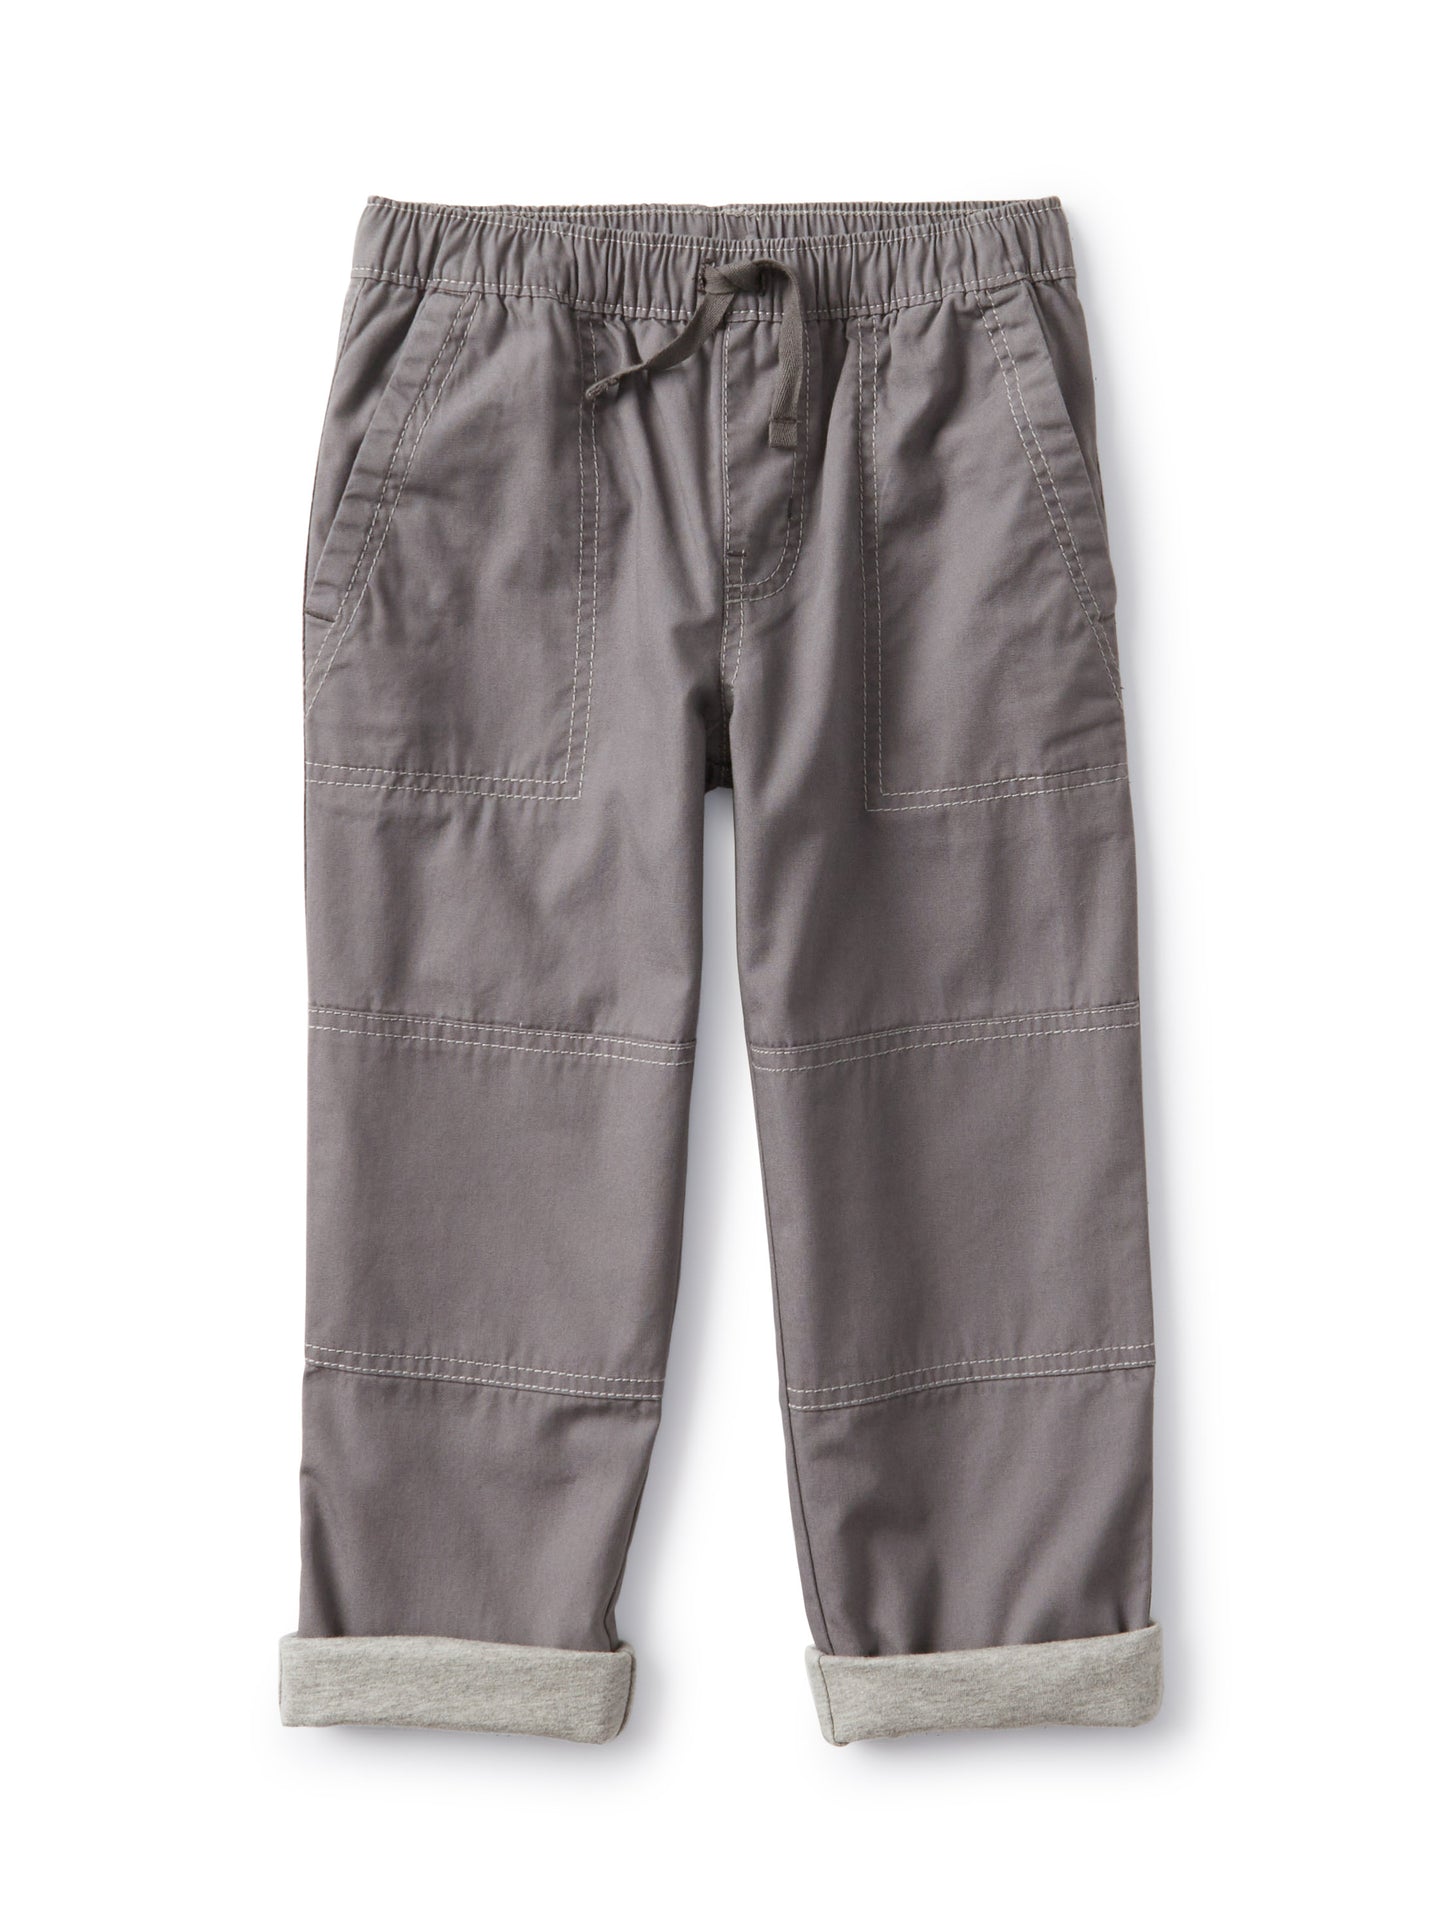 Cozy Jersey Lined Pants (Youth) - Thunder